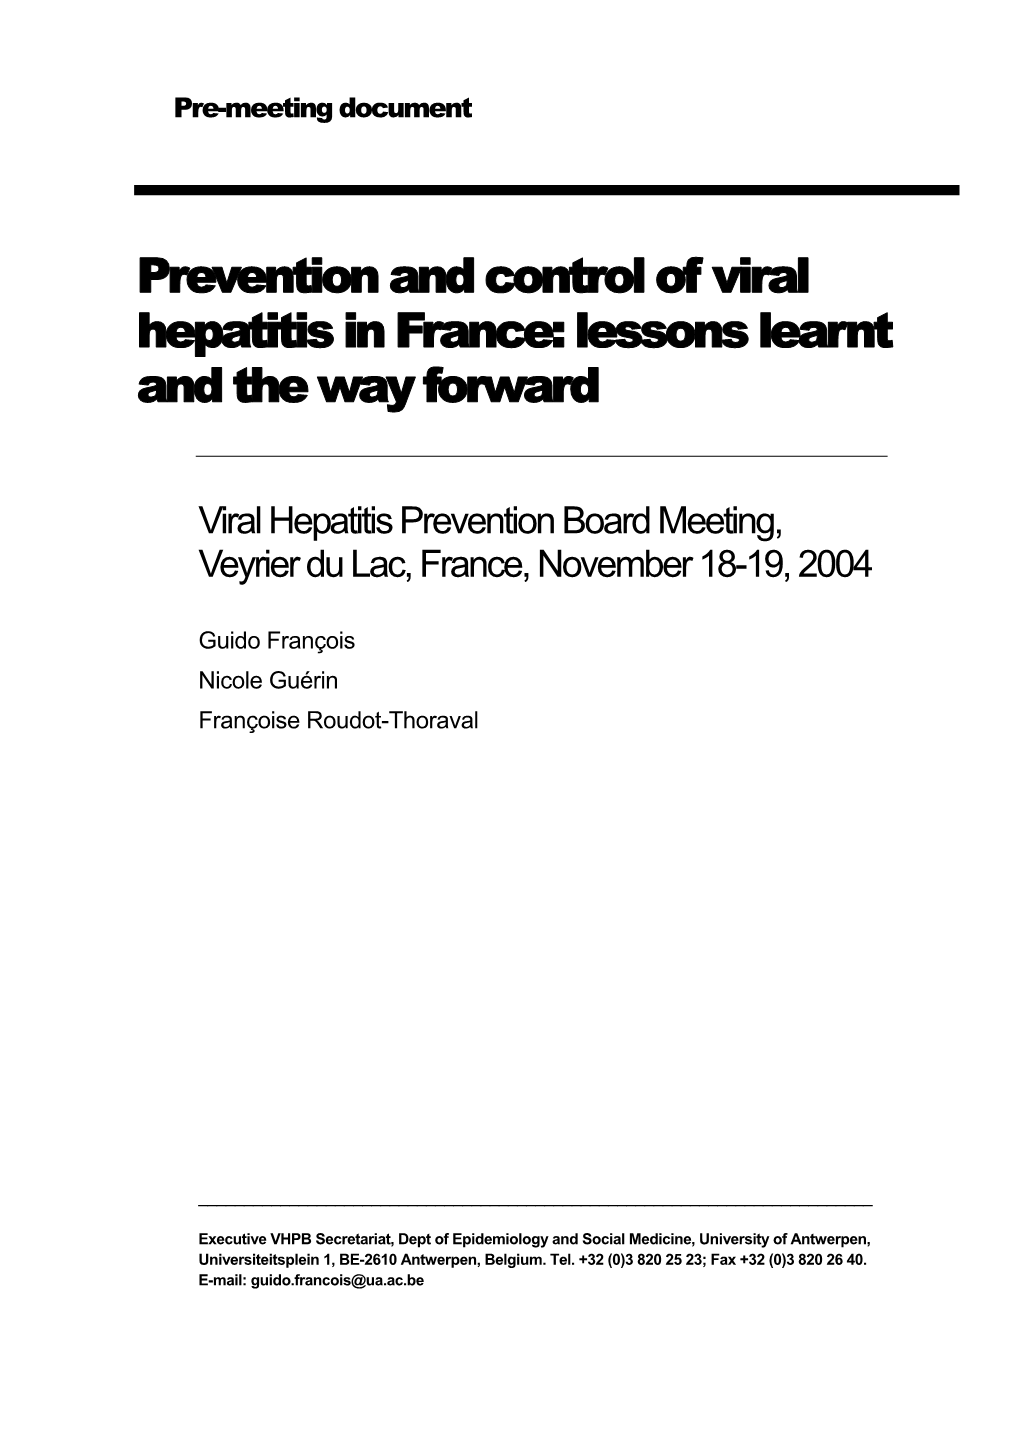 Prevention and Control of Viral Hepatitis in France: Lessons Learnt and the Way Forward